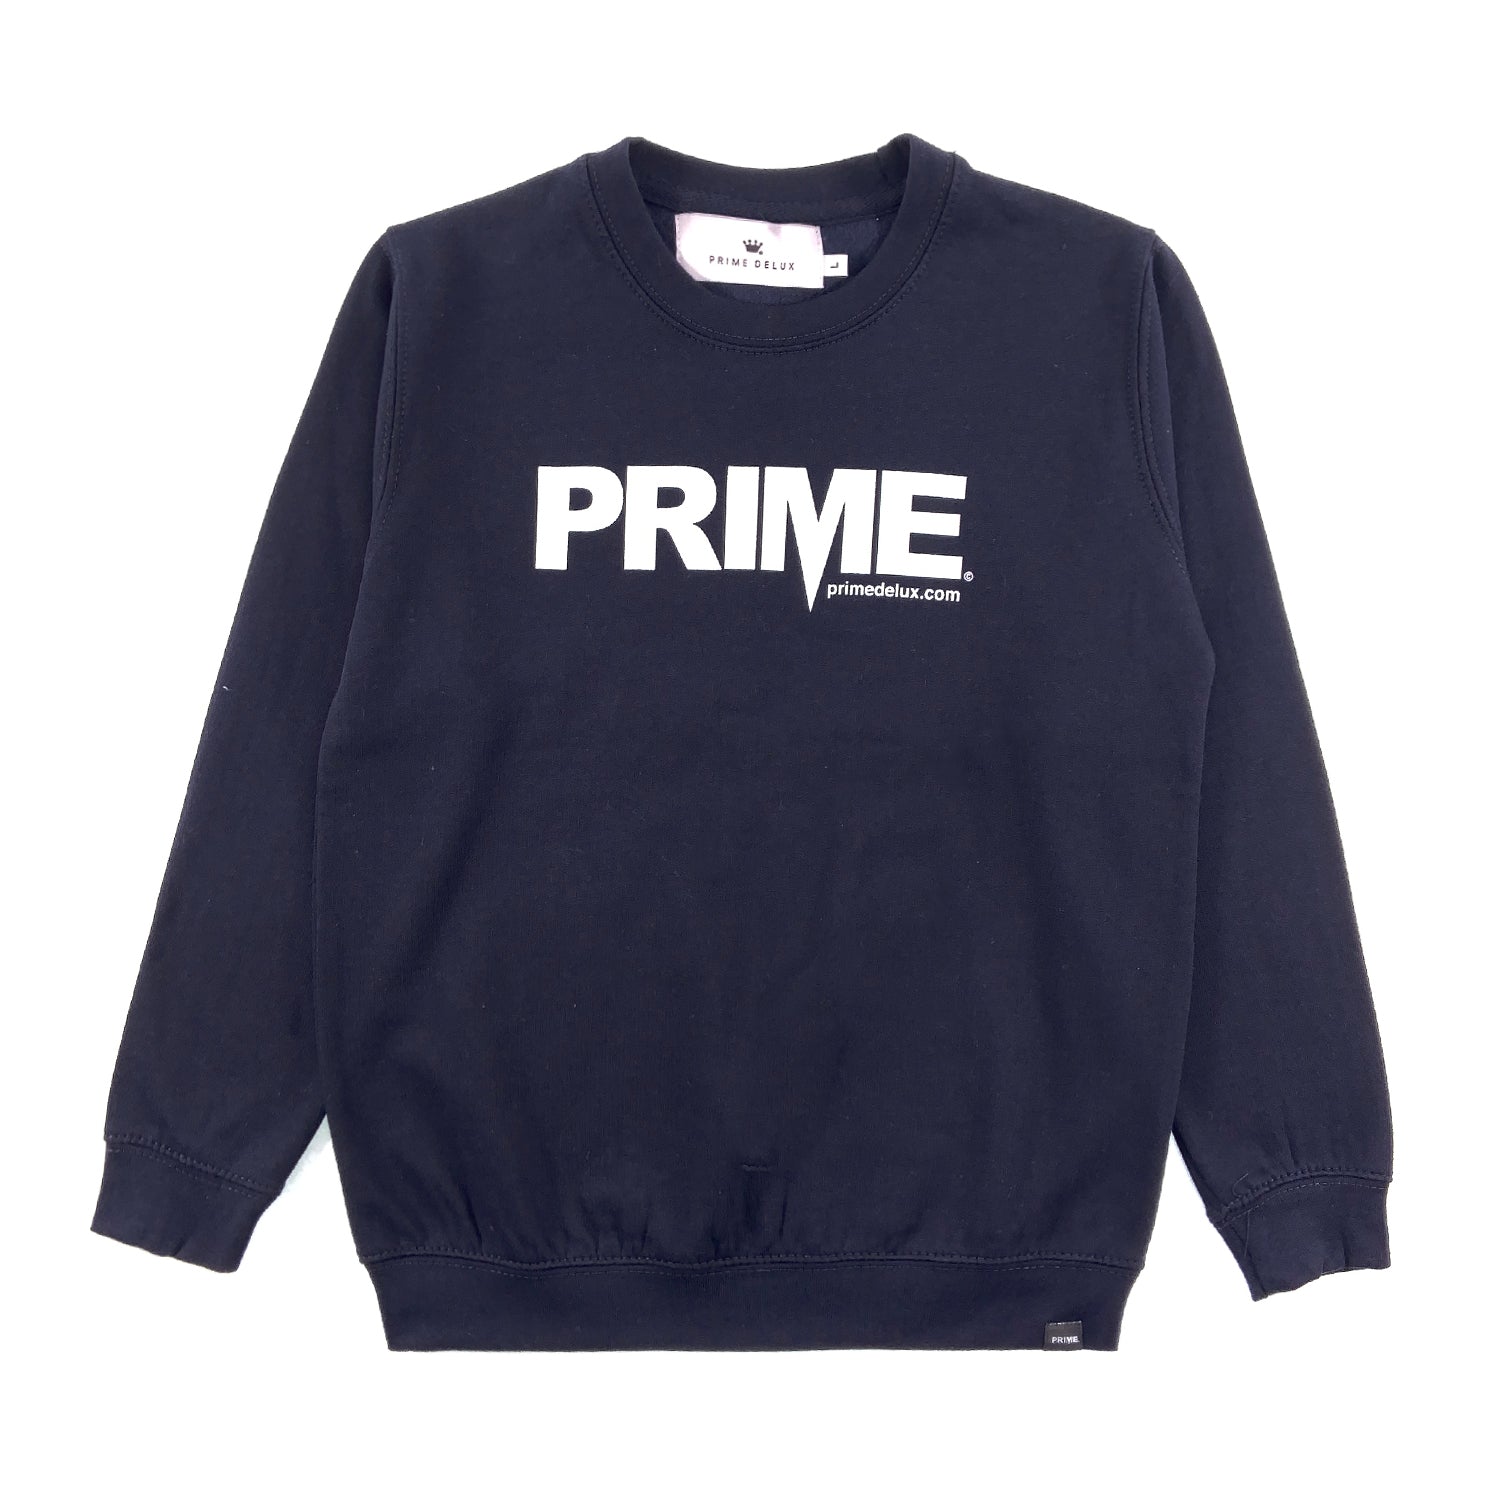 PRIME DELUX YOUTHS OG PREMIUM CREW SWEAT - NEW FRENCH NAVY / WHITE - Prime Delux Store